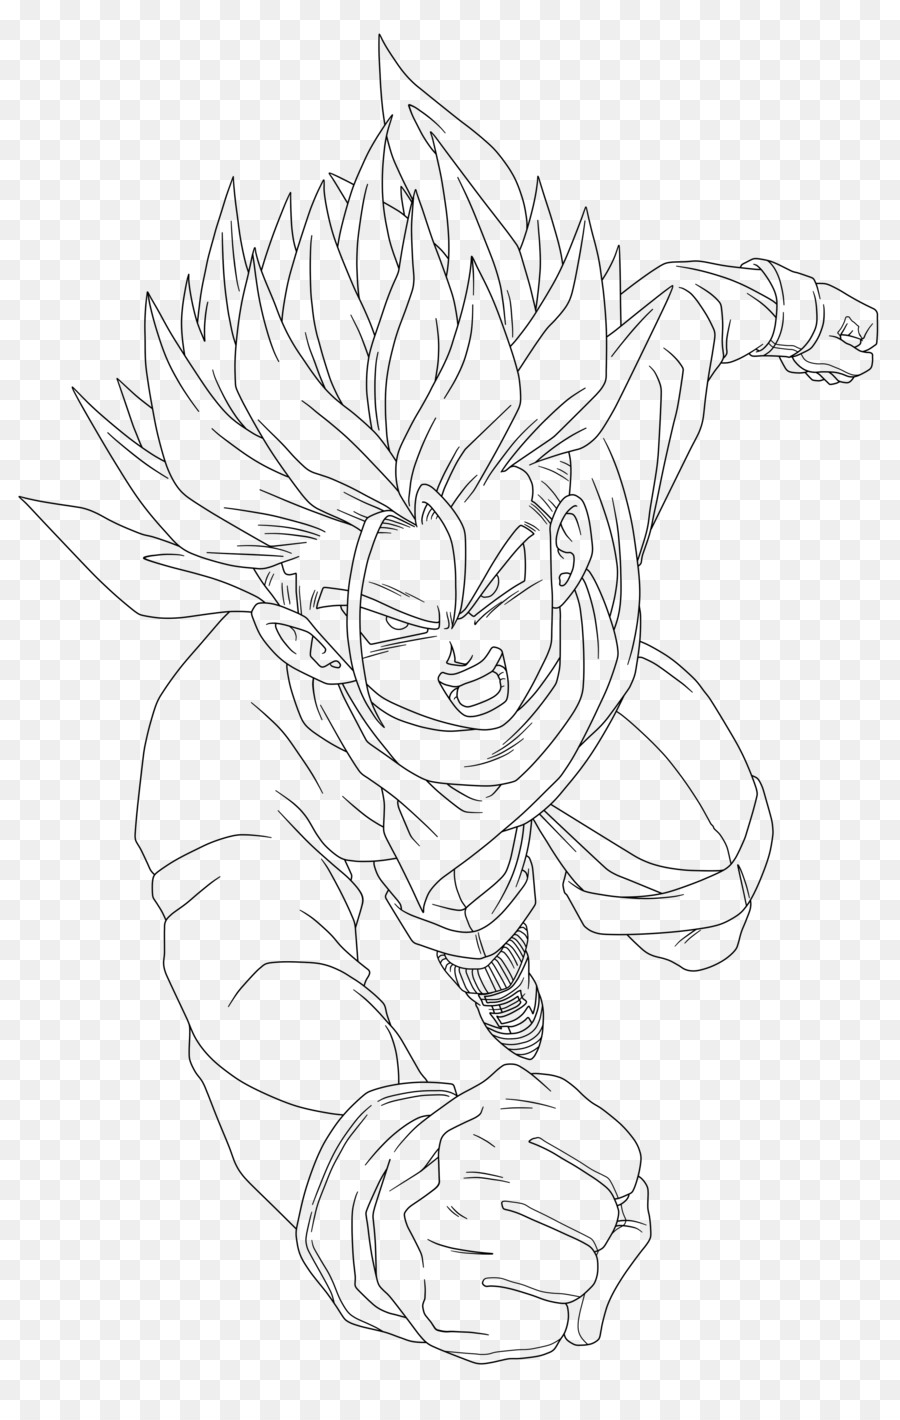 Trunks Sketch at PaintingValley.com | Explore collection of Trunks Sketch